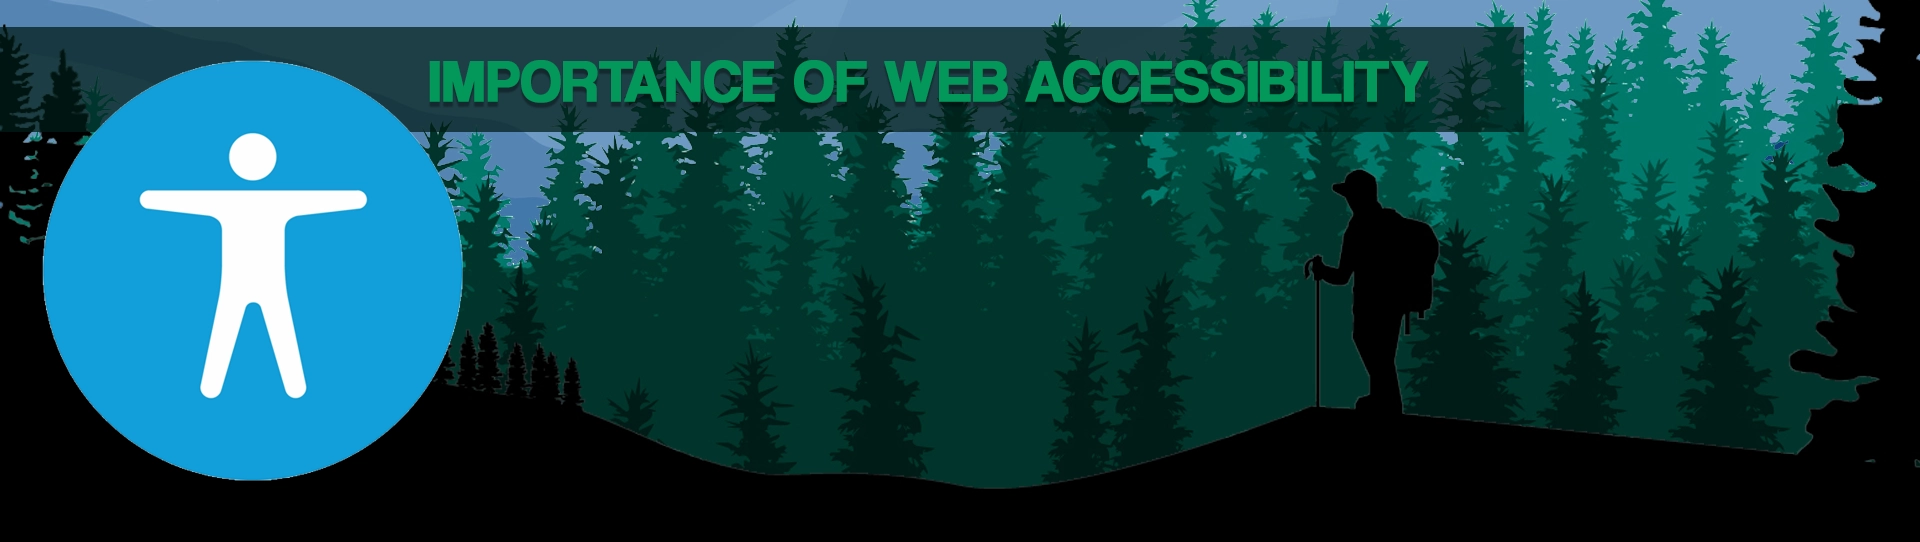 web-accessibility-importance